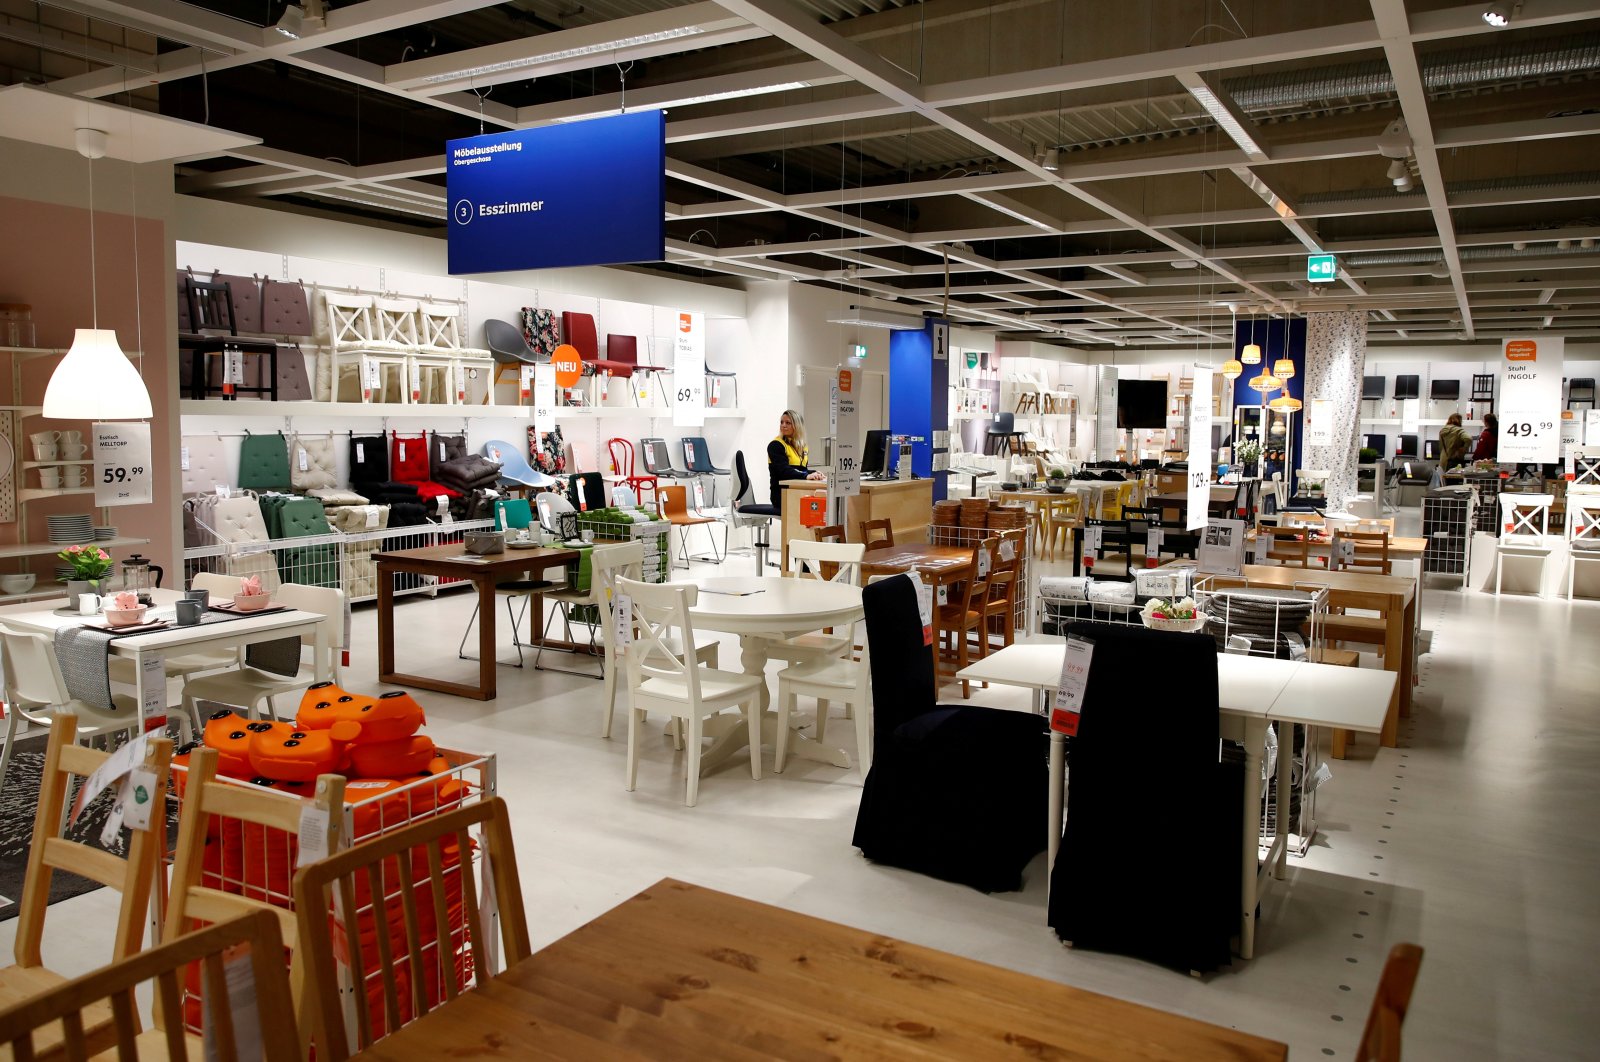 Swedish giant Ikea to buy back used furniture for recycling giving